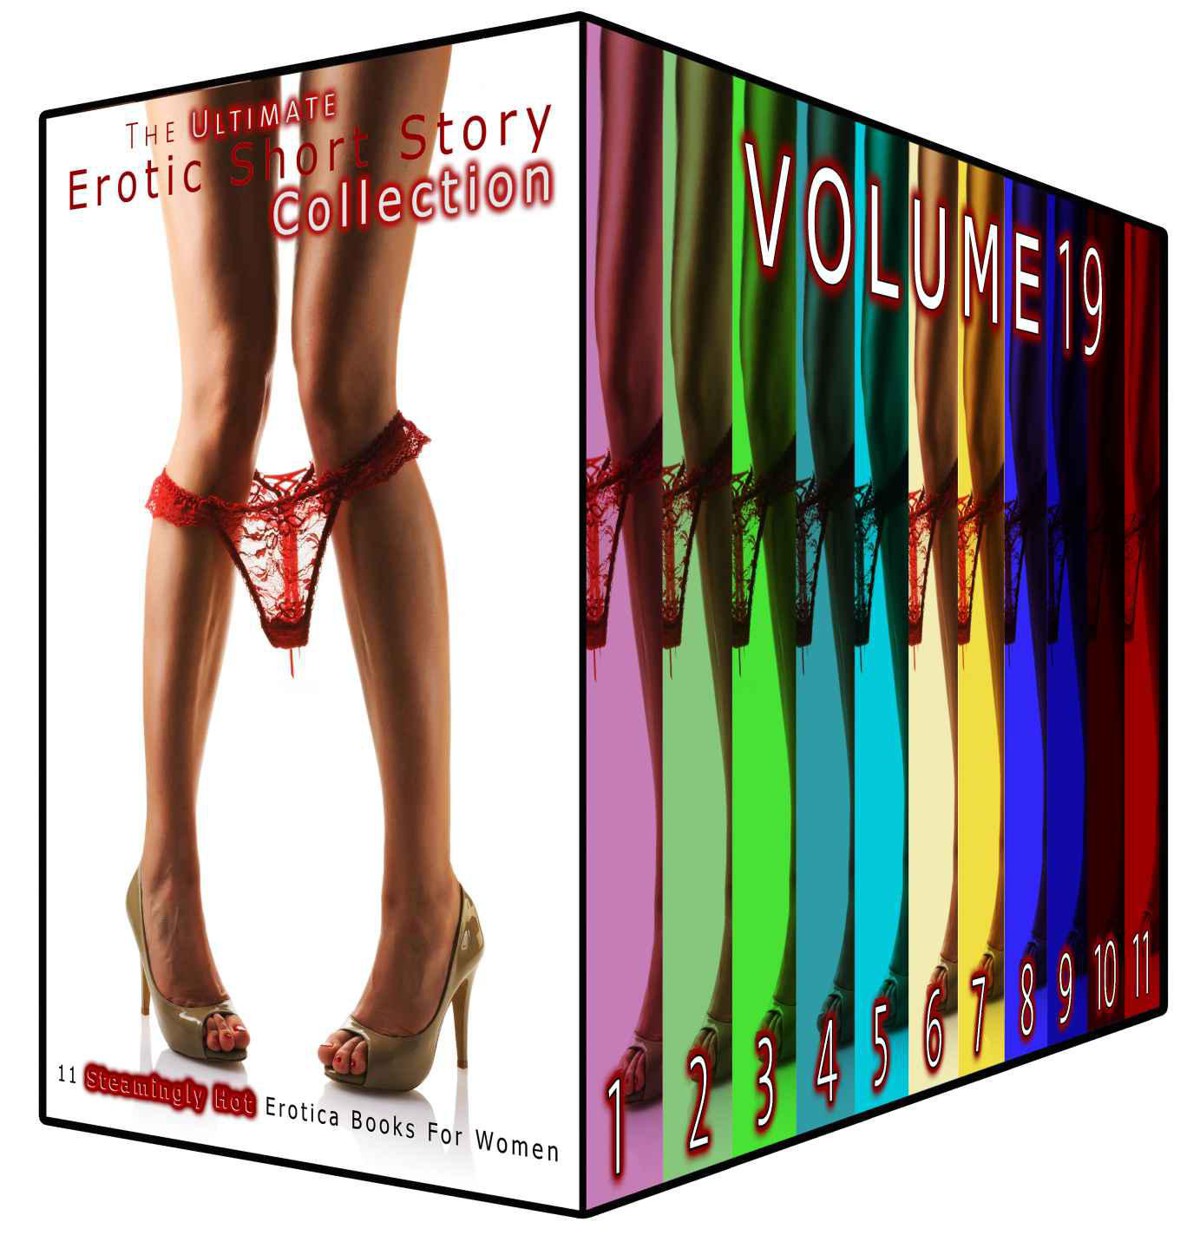 The Ultimate Erotic Short Story Collection 19